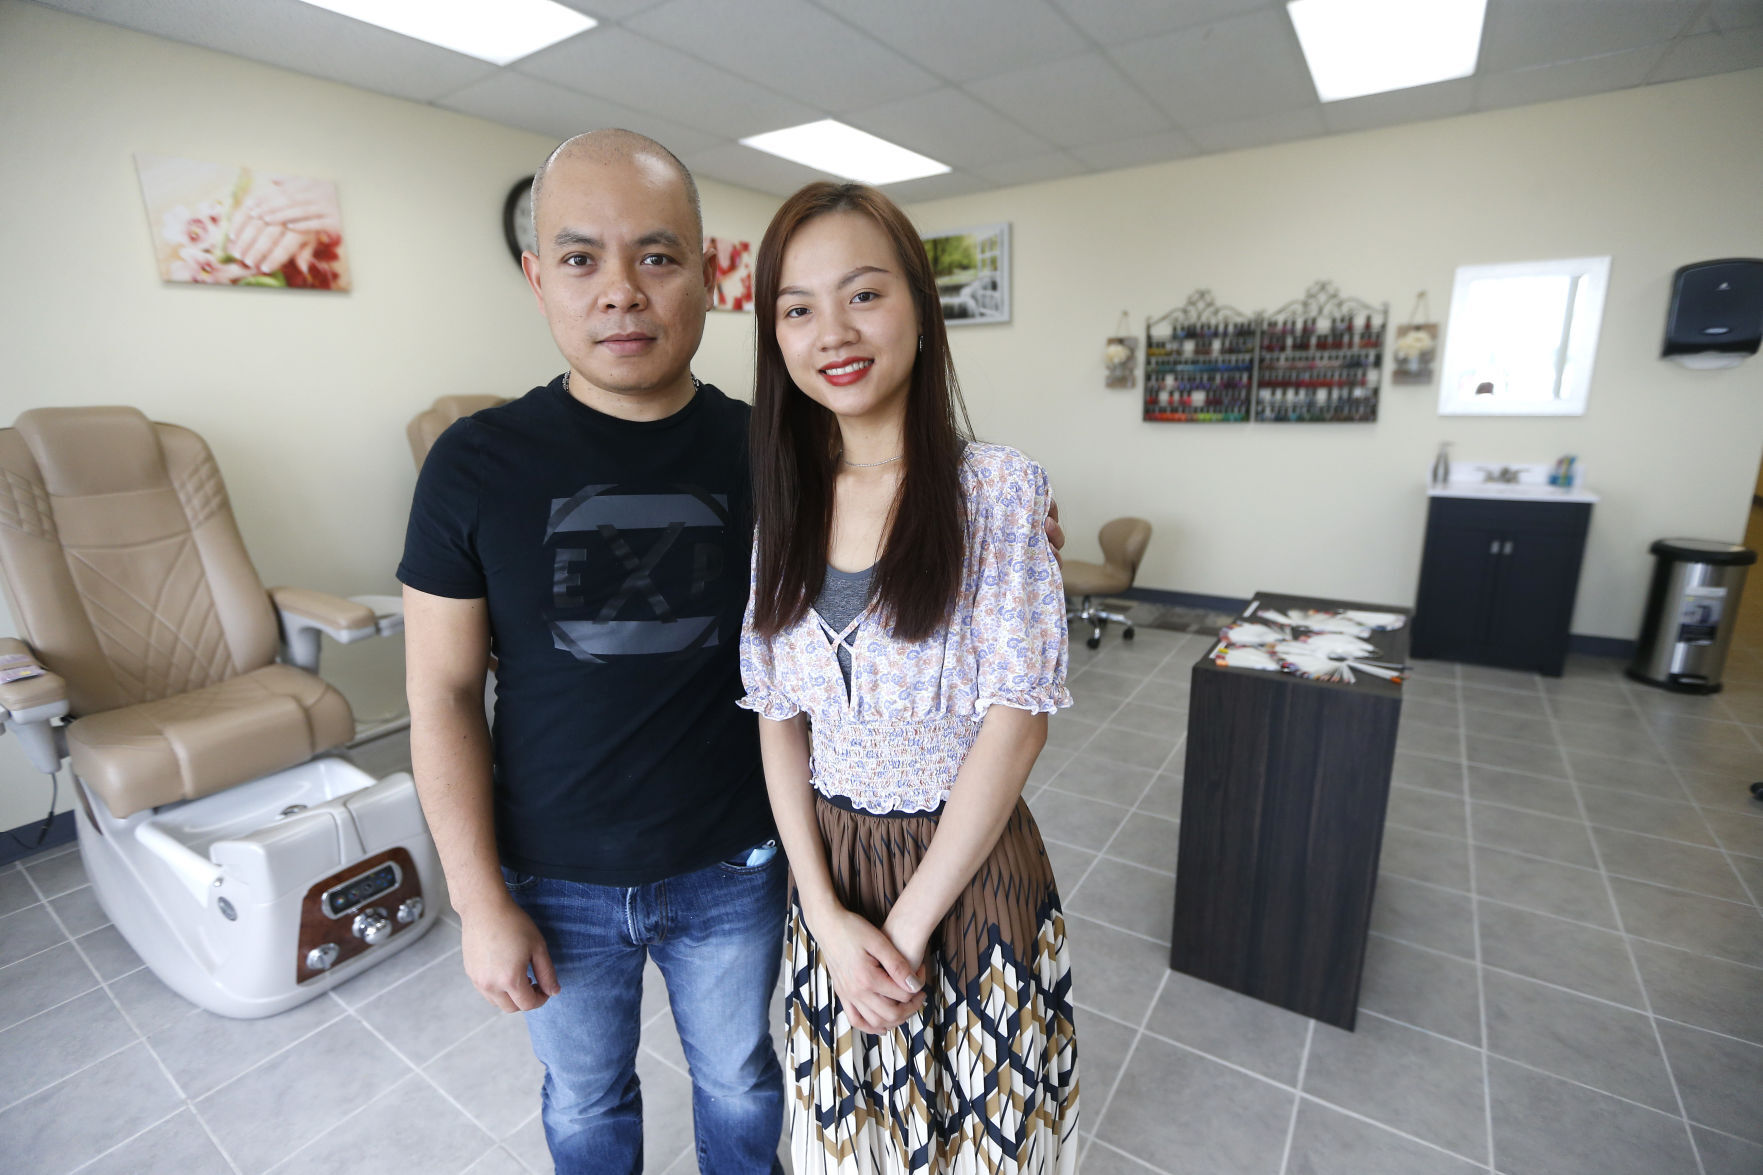 Tony Phan and his wife, Kim Chi Nguyen, are the owners of Kim Nails & Spa in Dyersville, Iowa.    PHOTO CREDIT: Dave Kettering